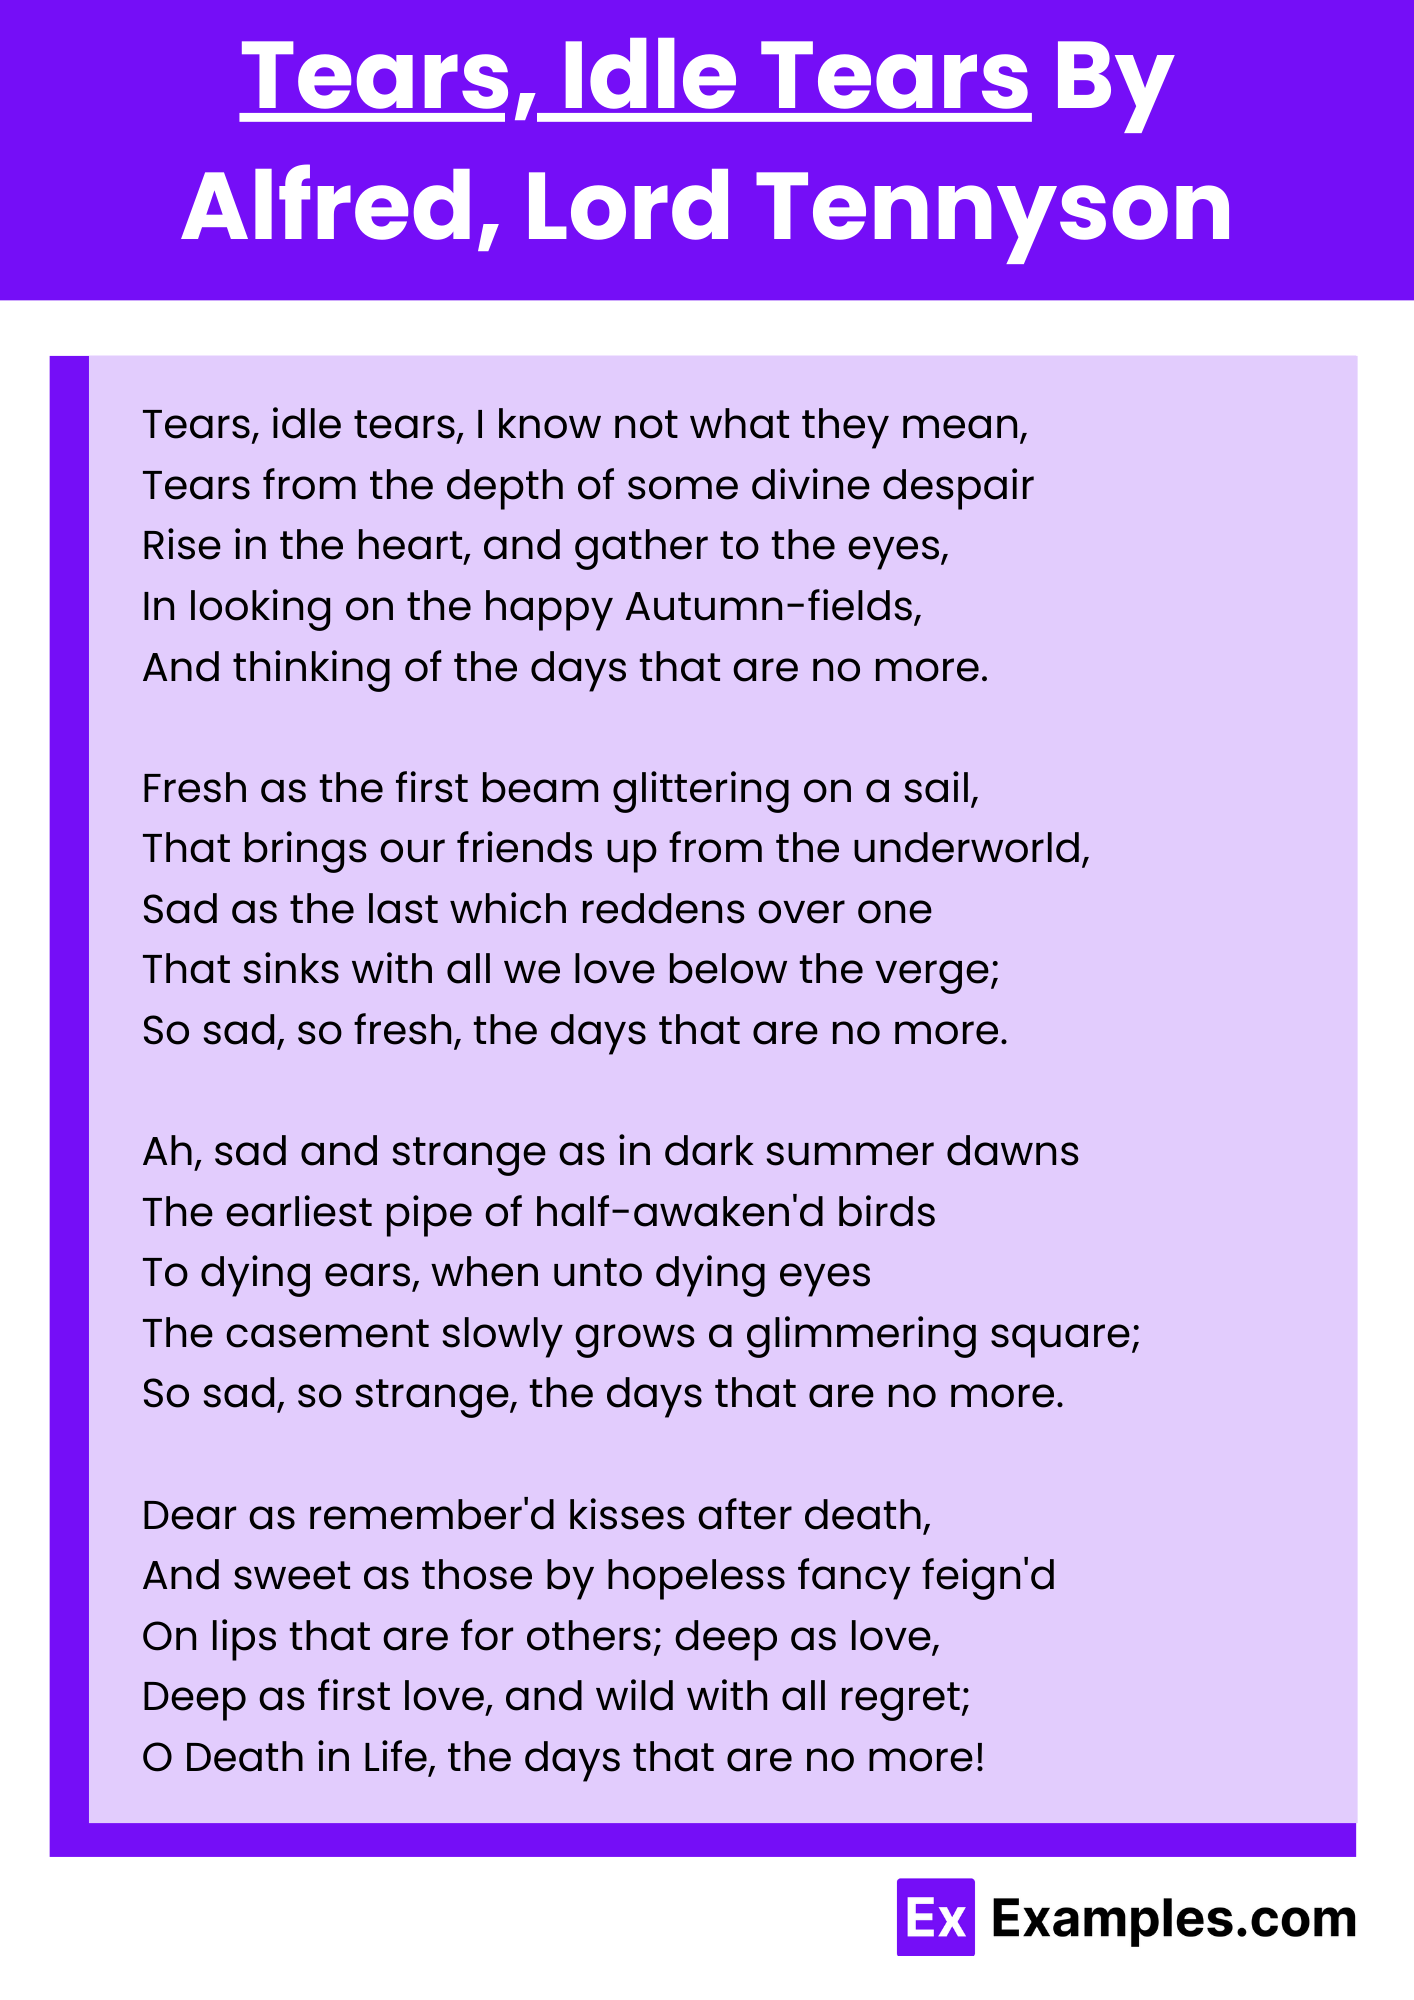 Tears, Idle Tears By Alfred, Lord Tennyson